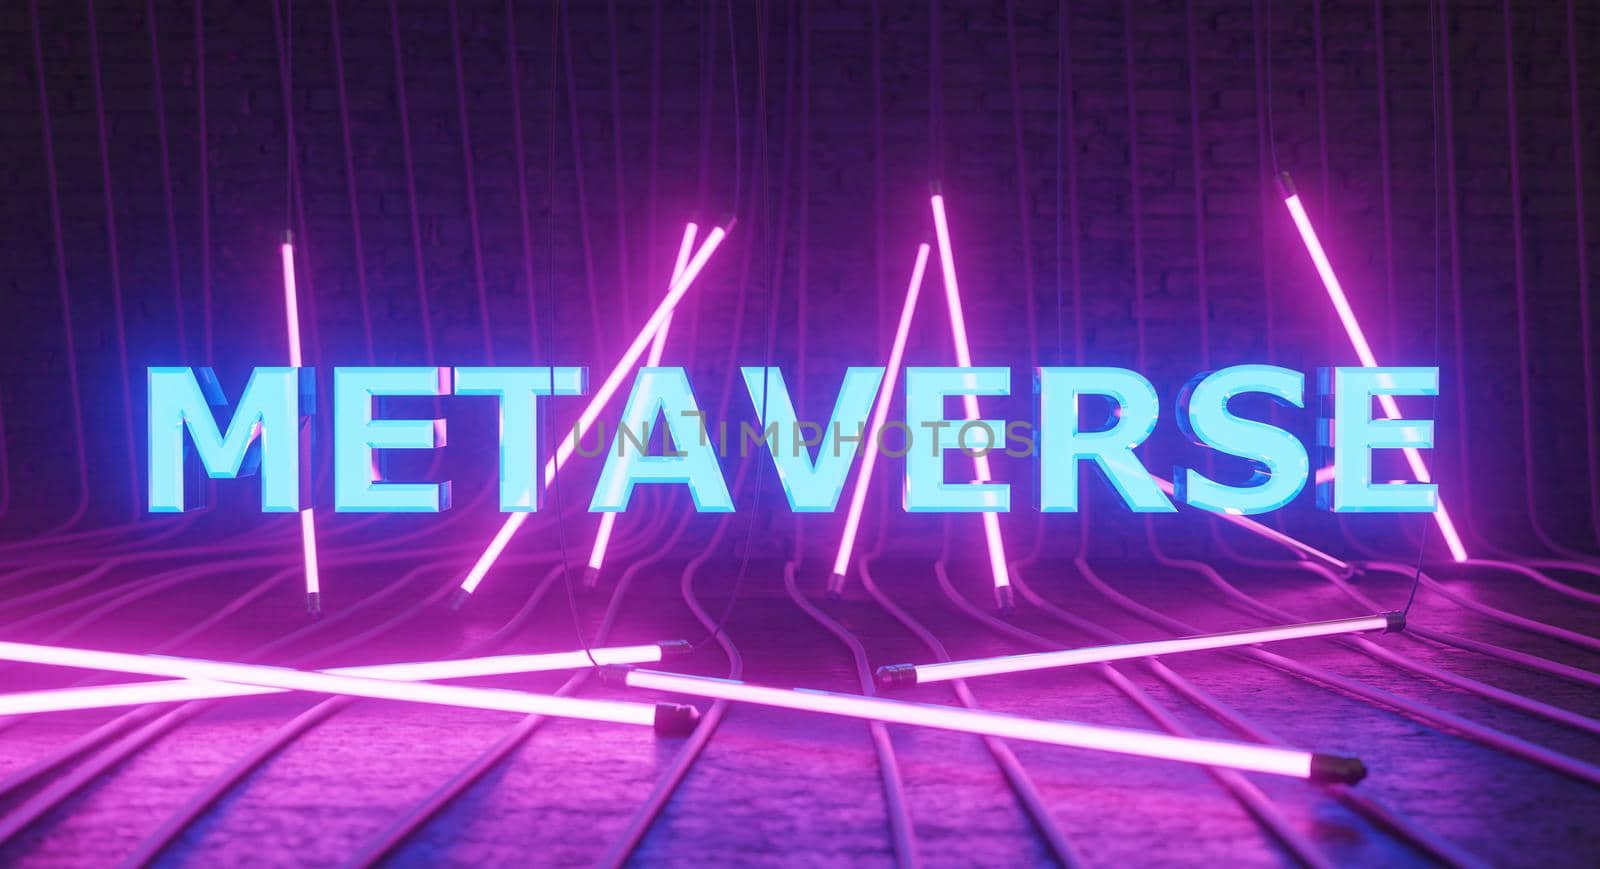 METAVERSE light sign with neon bars hanging around and wires on the ground. urban style. concept of metaverse, nft, cryptocurrencies, future, decentralized, play to earn and video games. 3d rendering